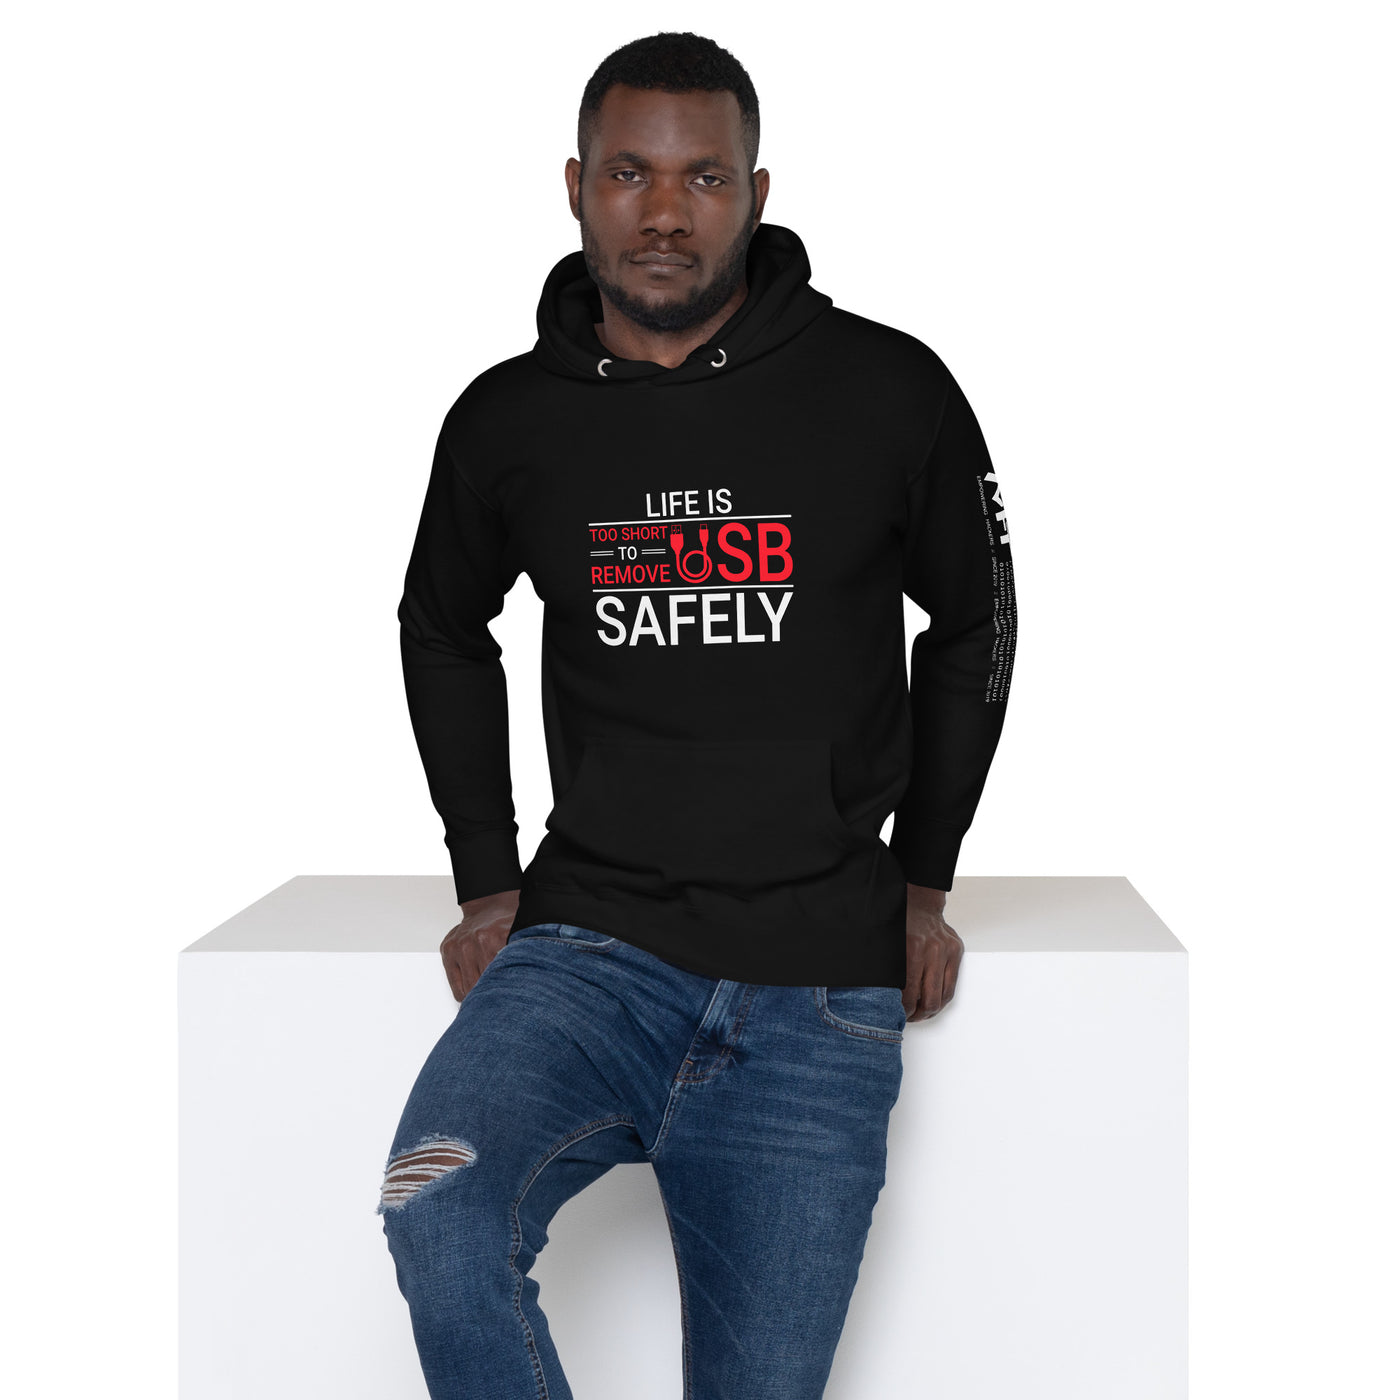 Life is too Short to Remove USB Safely - Unisex Hoodie